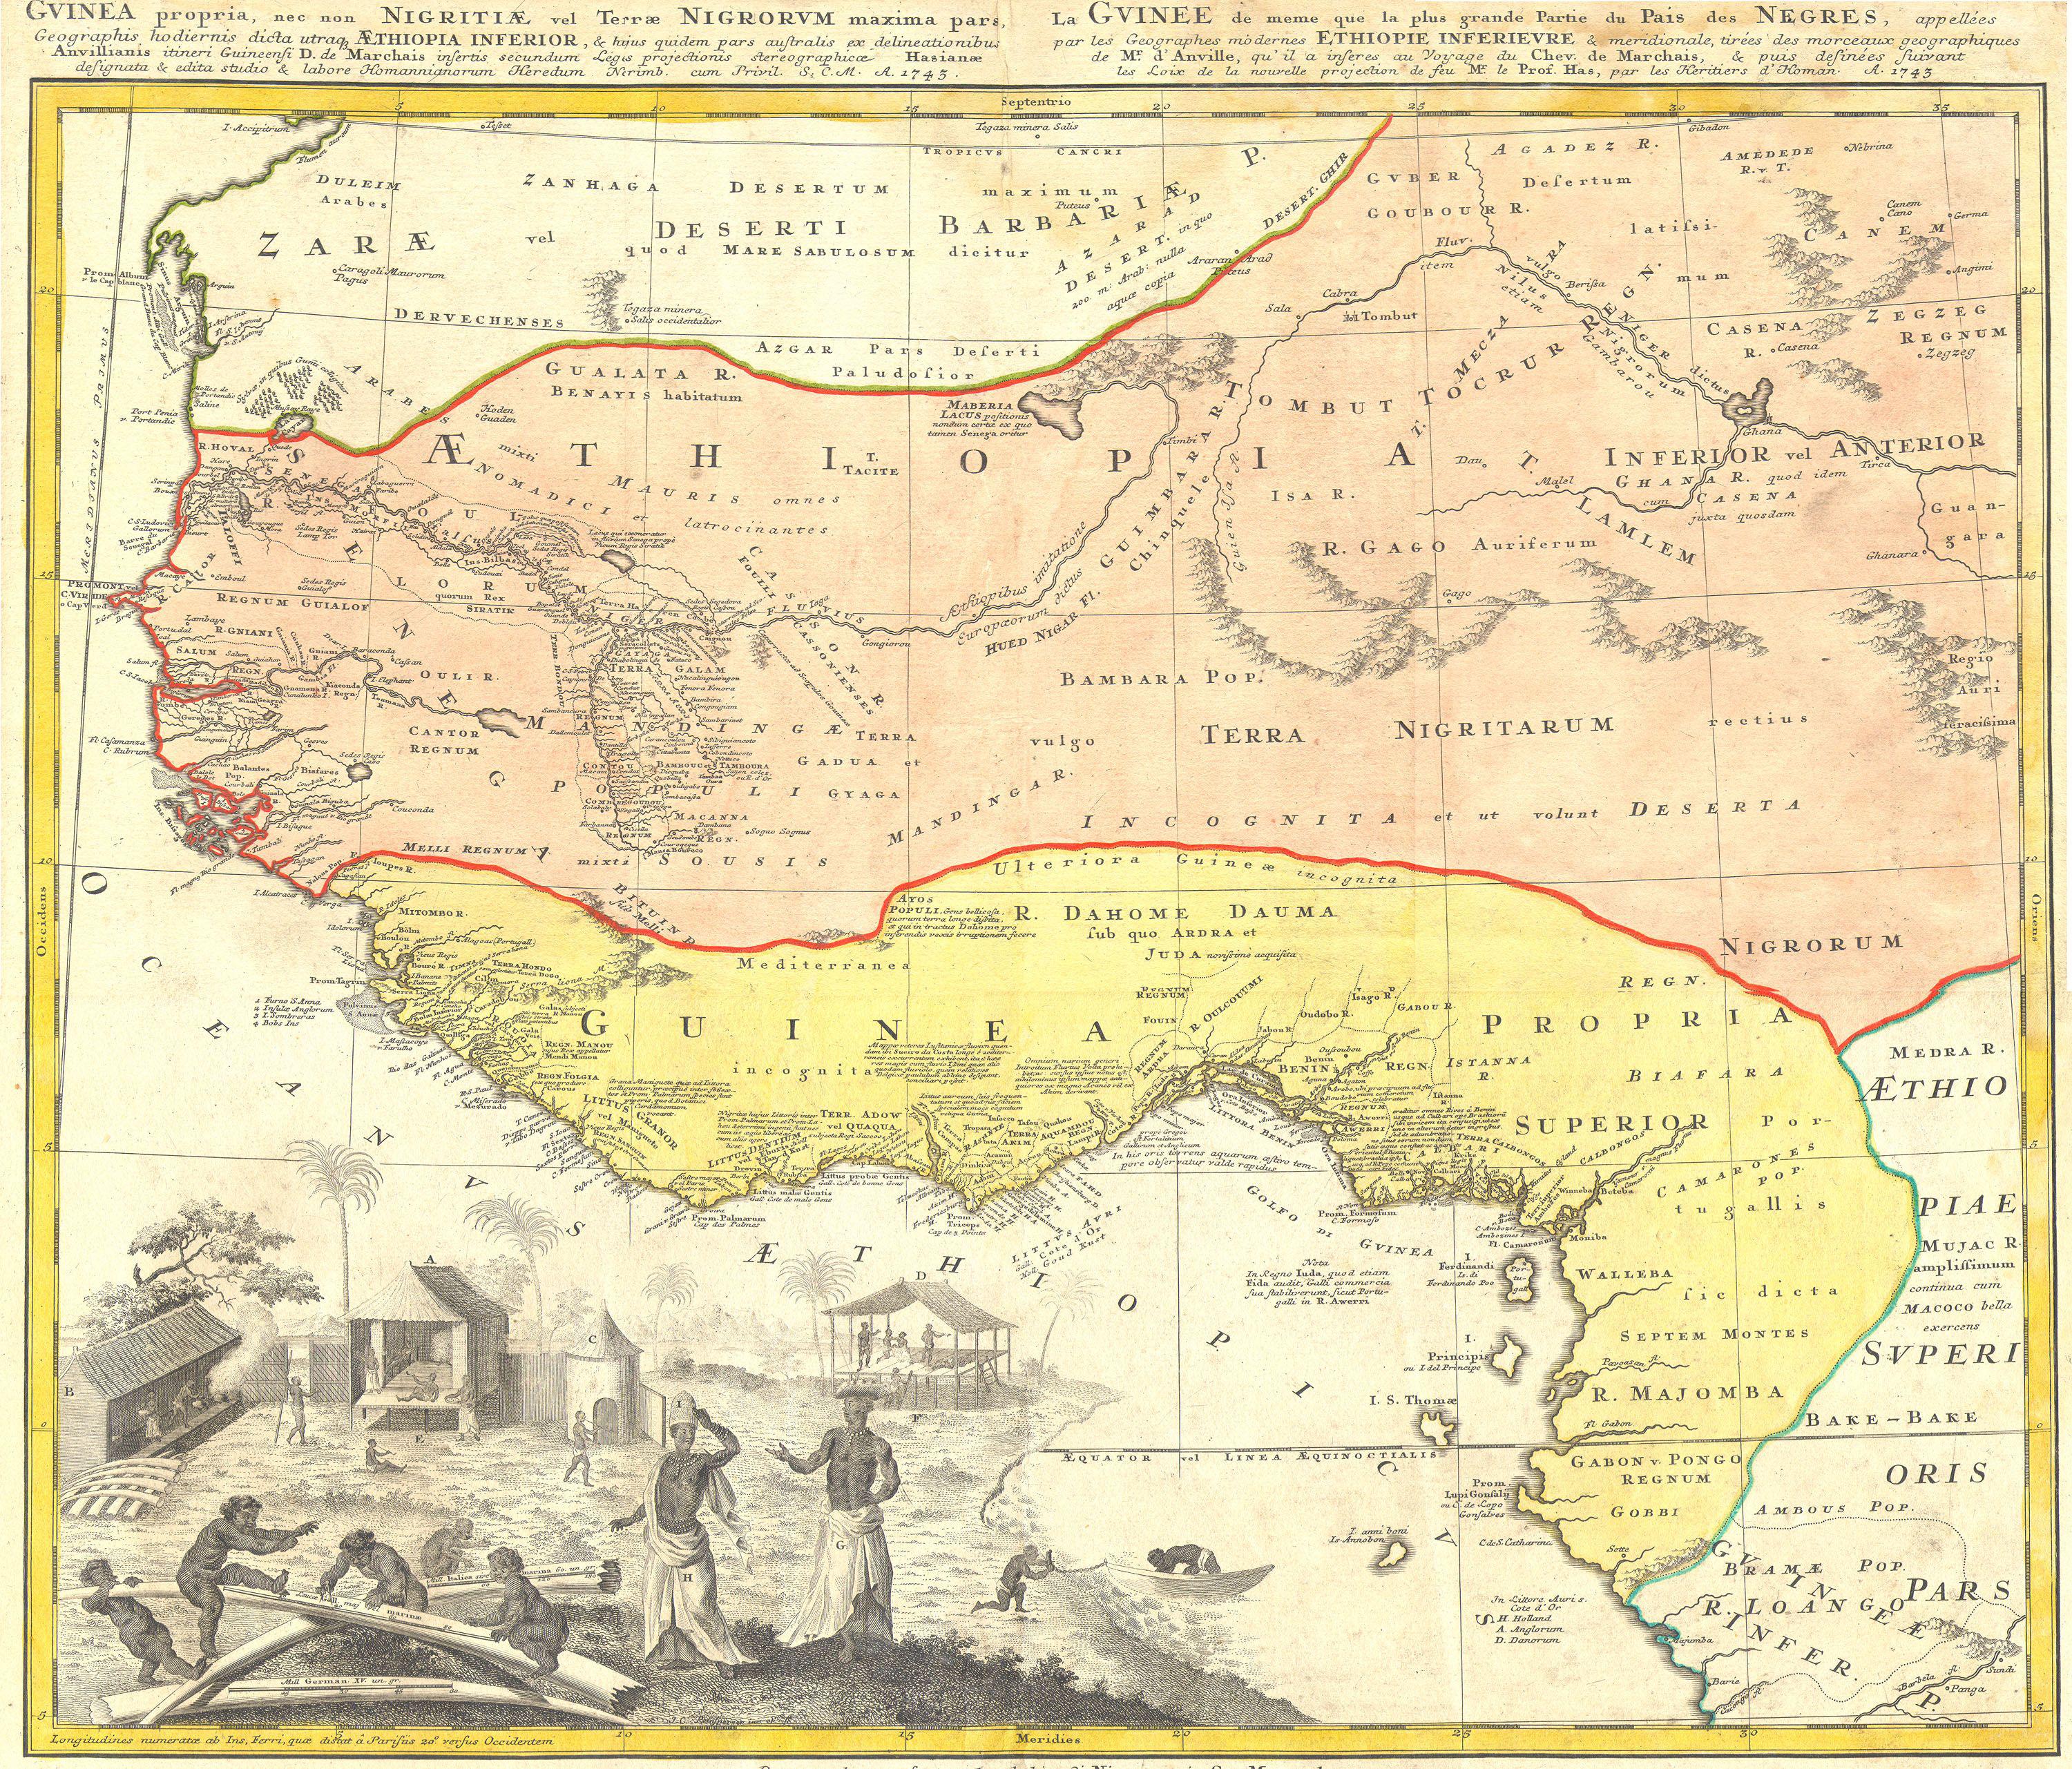 Map Of Africa Slave Trade File:1743 Homann Heirs Map of West Africa ( Slave Trade references 